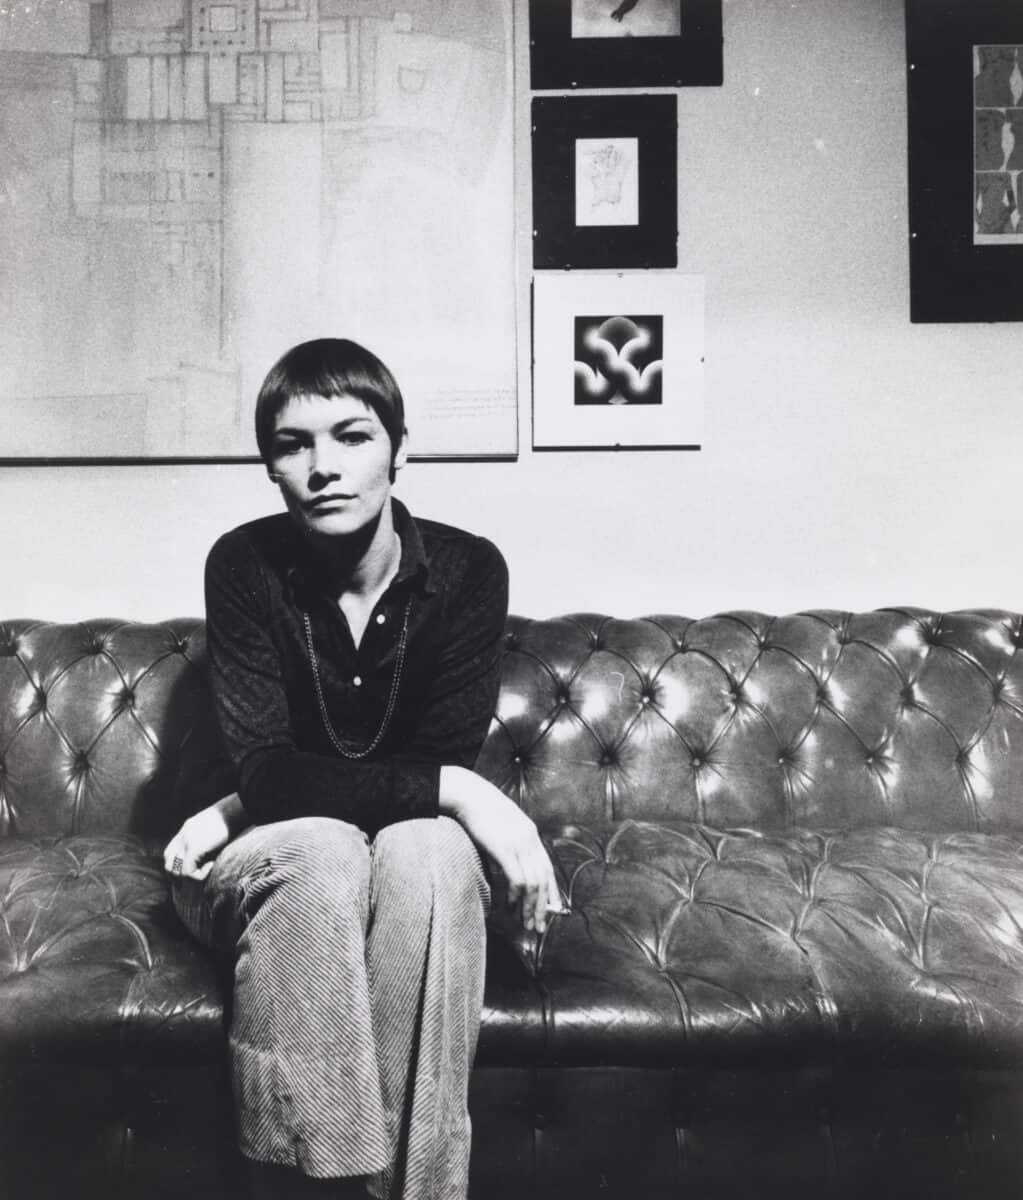 Bill Brandt , Glenda Jackson 1971 Tate. Gift Eric and Louise Franck London Collection 2013 © The Estate of B ill Brandt